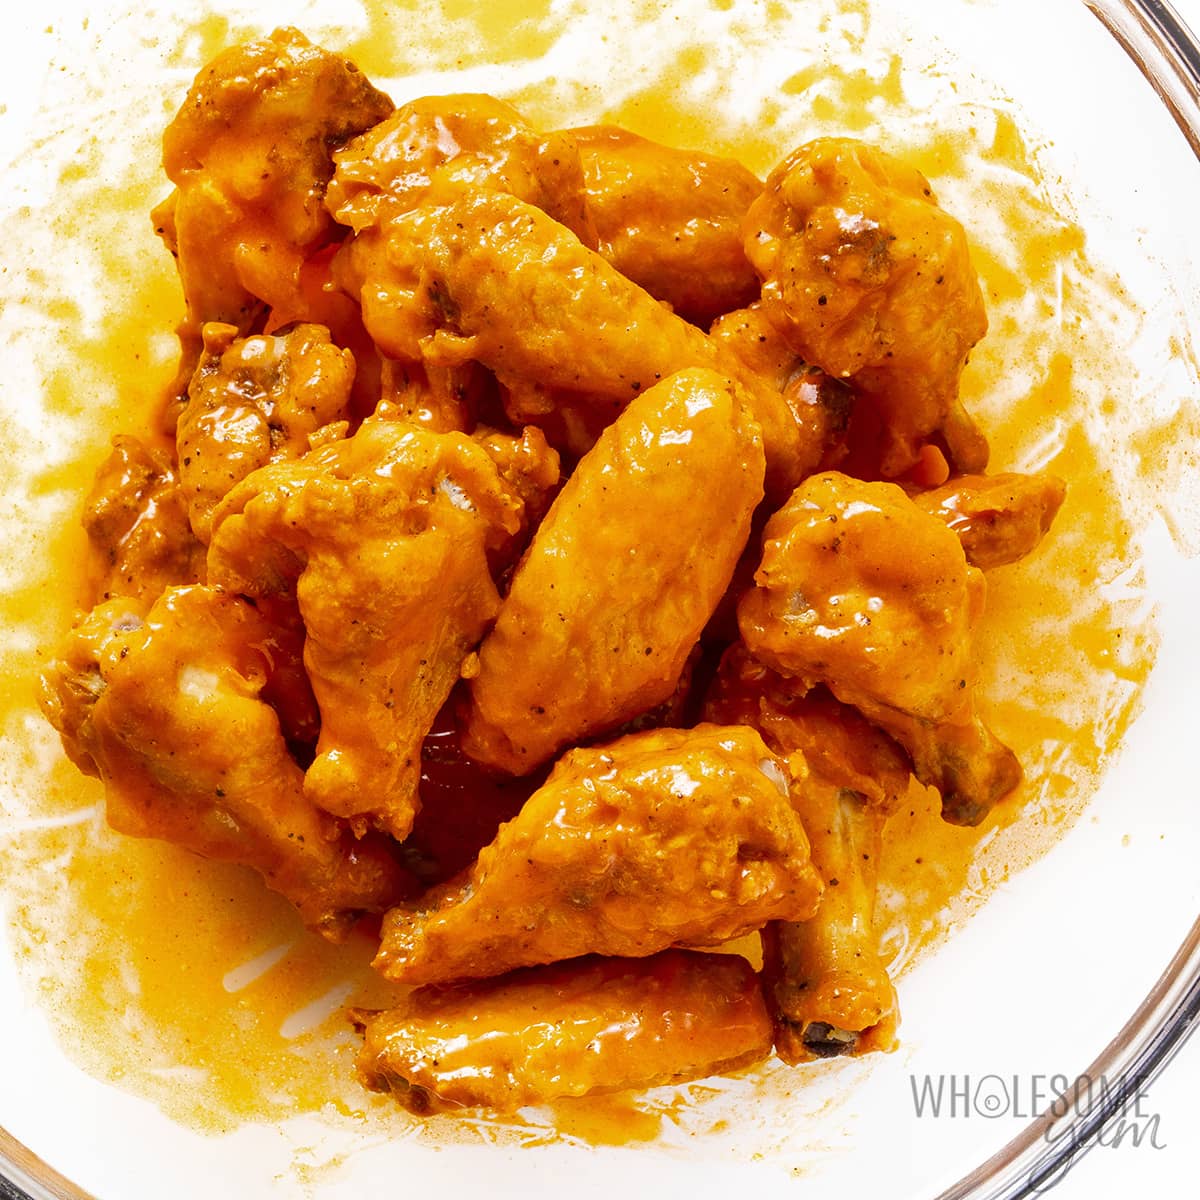 Wings tossed in the buffalo sauce in a bowl.